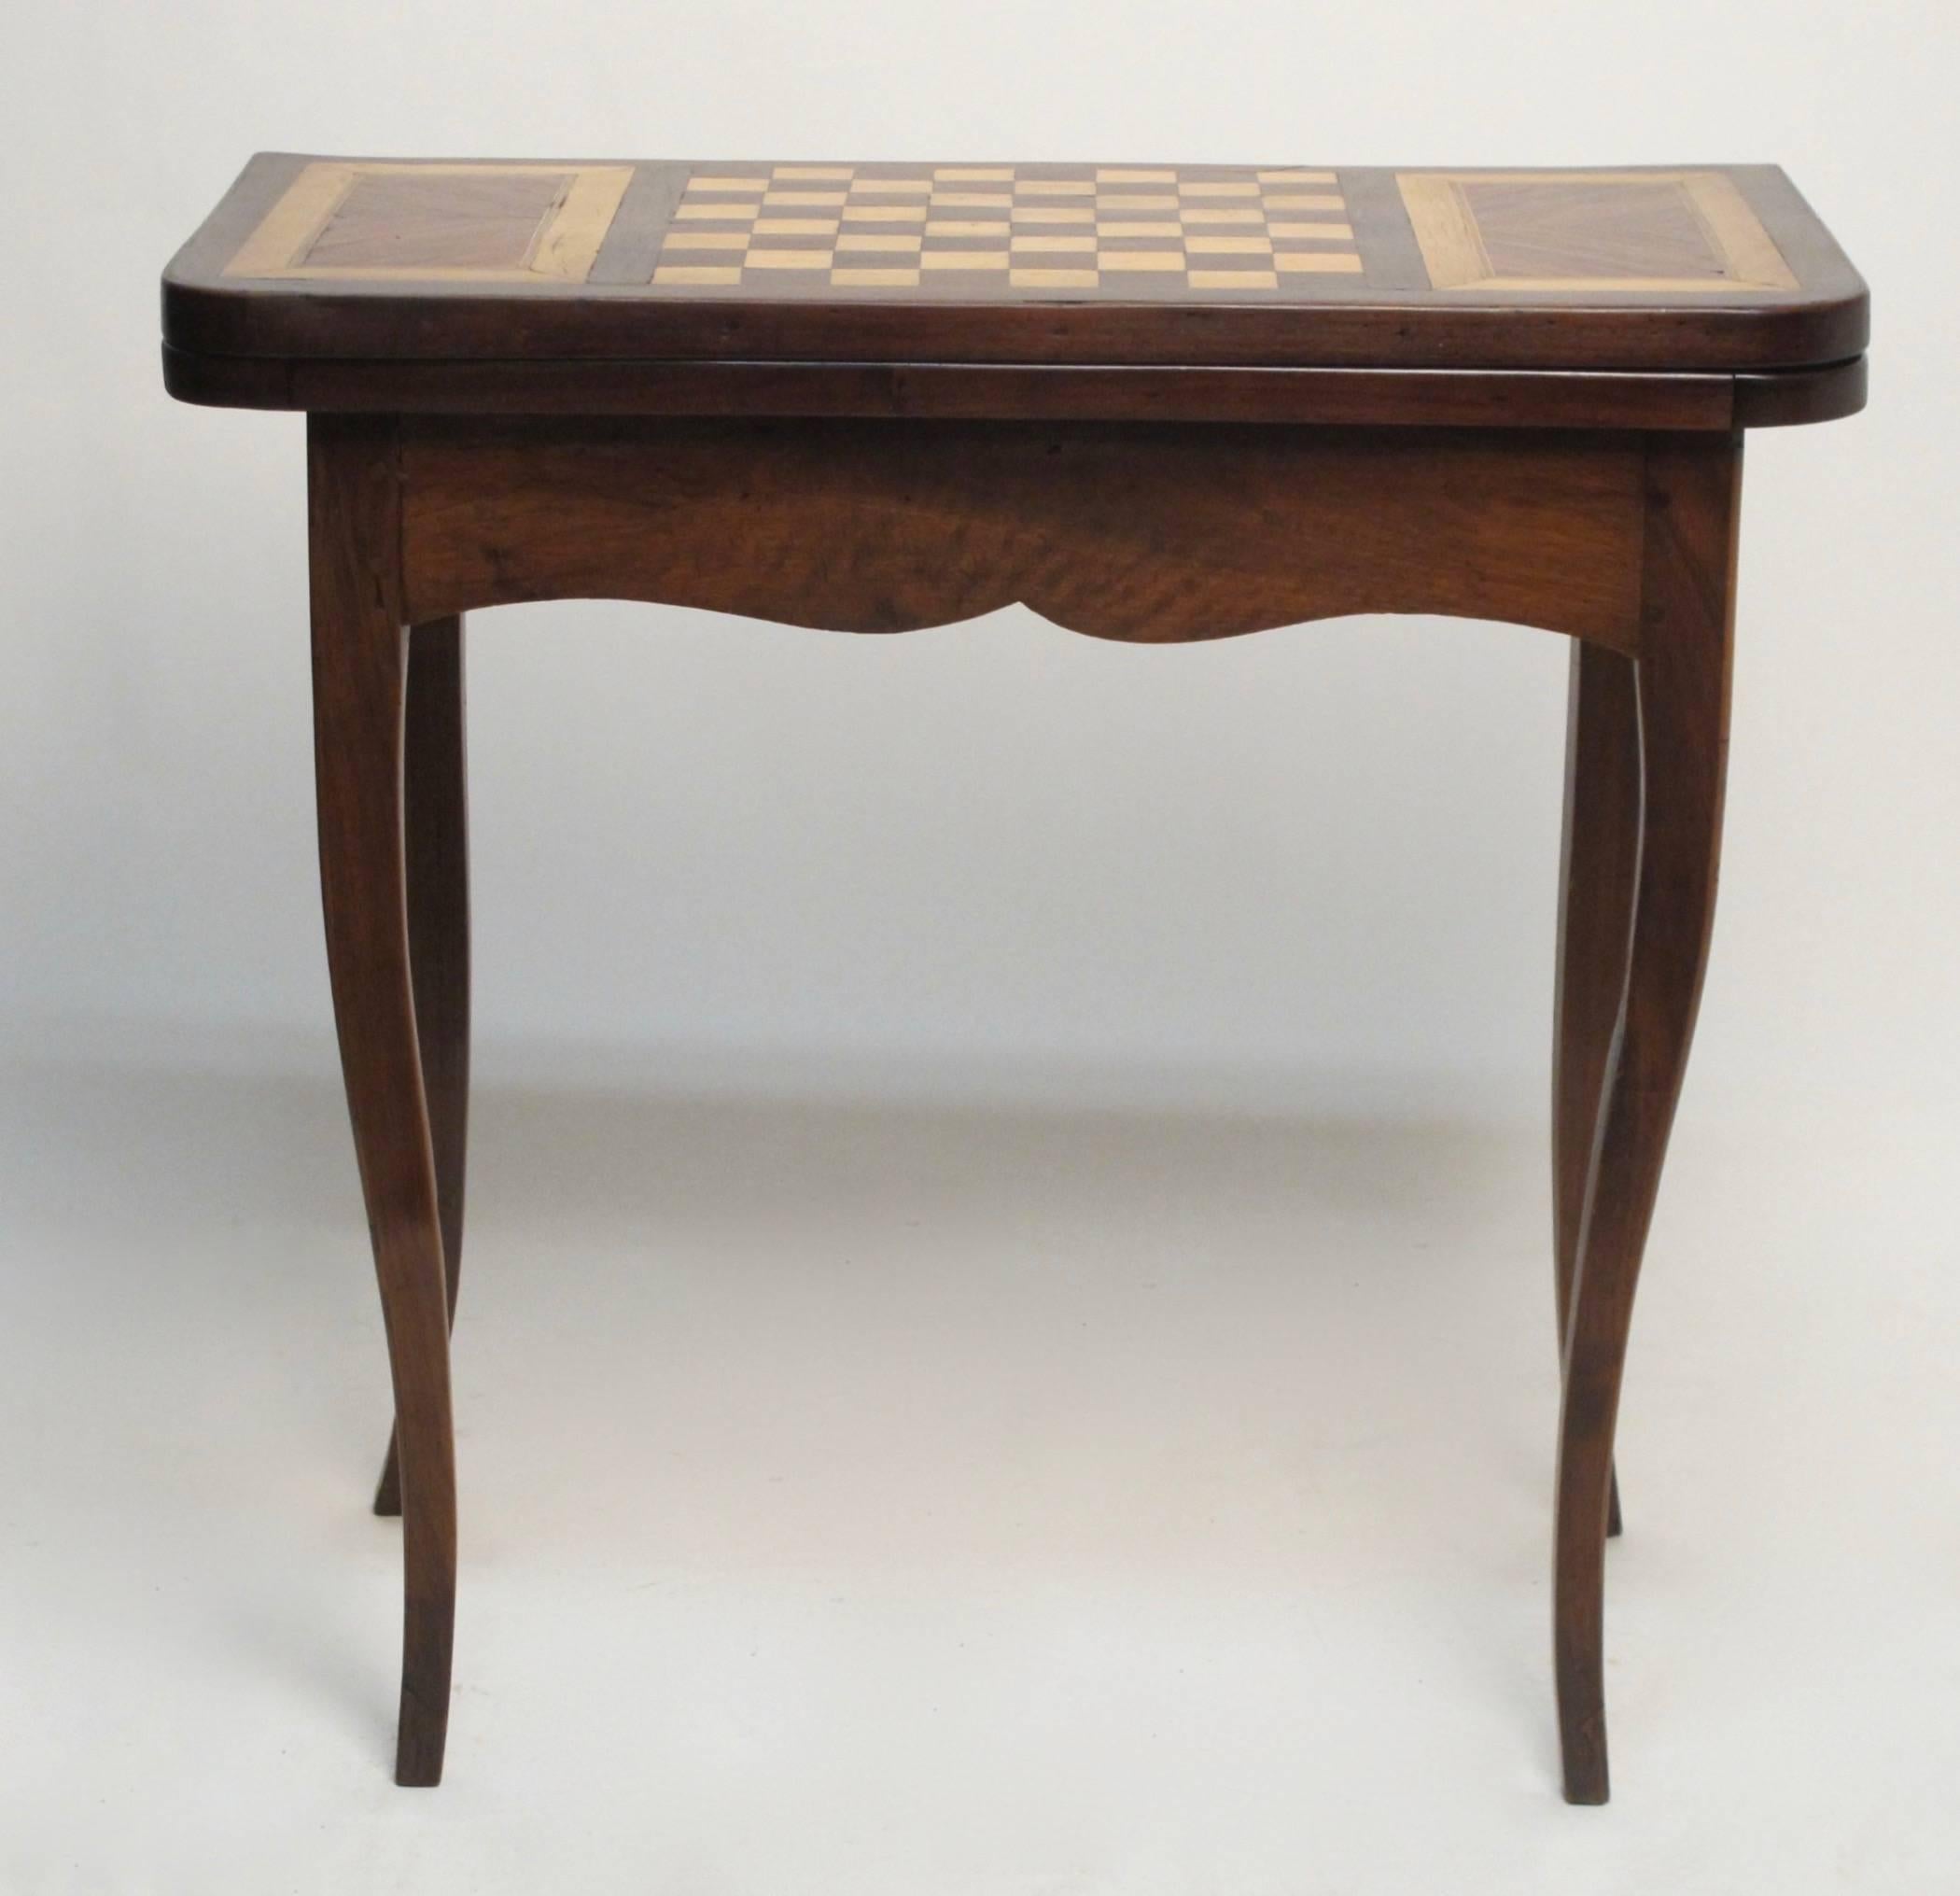 French game table with inlaid chess board, made of mixed fruitwoods with walnut and black walnut. Top flips open to a felt lined surface (felt fabric shows some age and wear). Recently refinished, France, early 19th century.